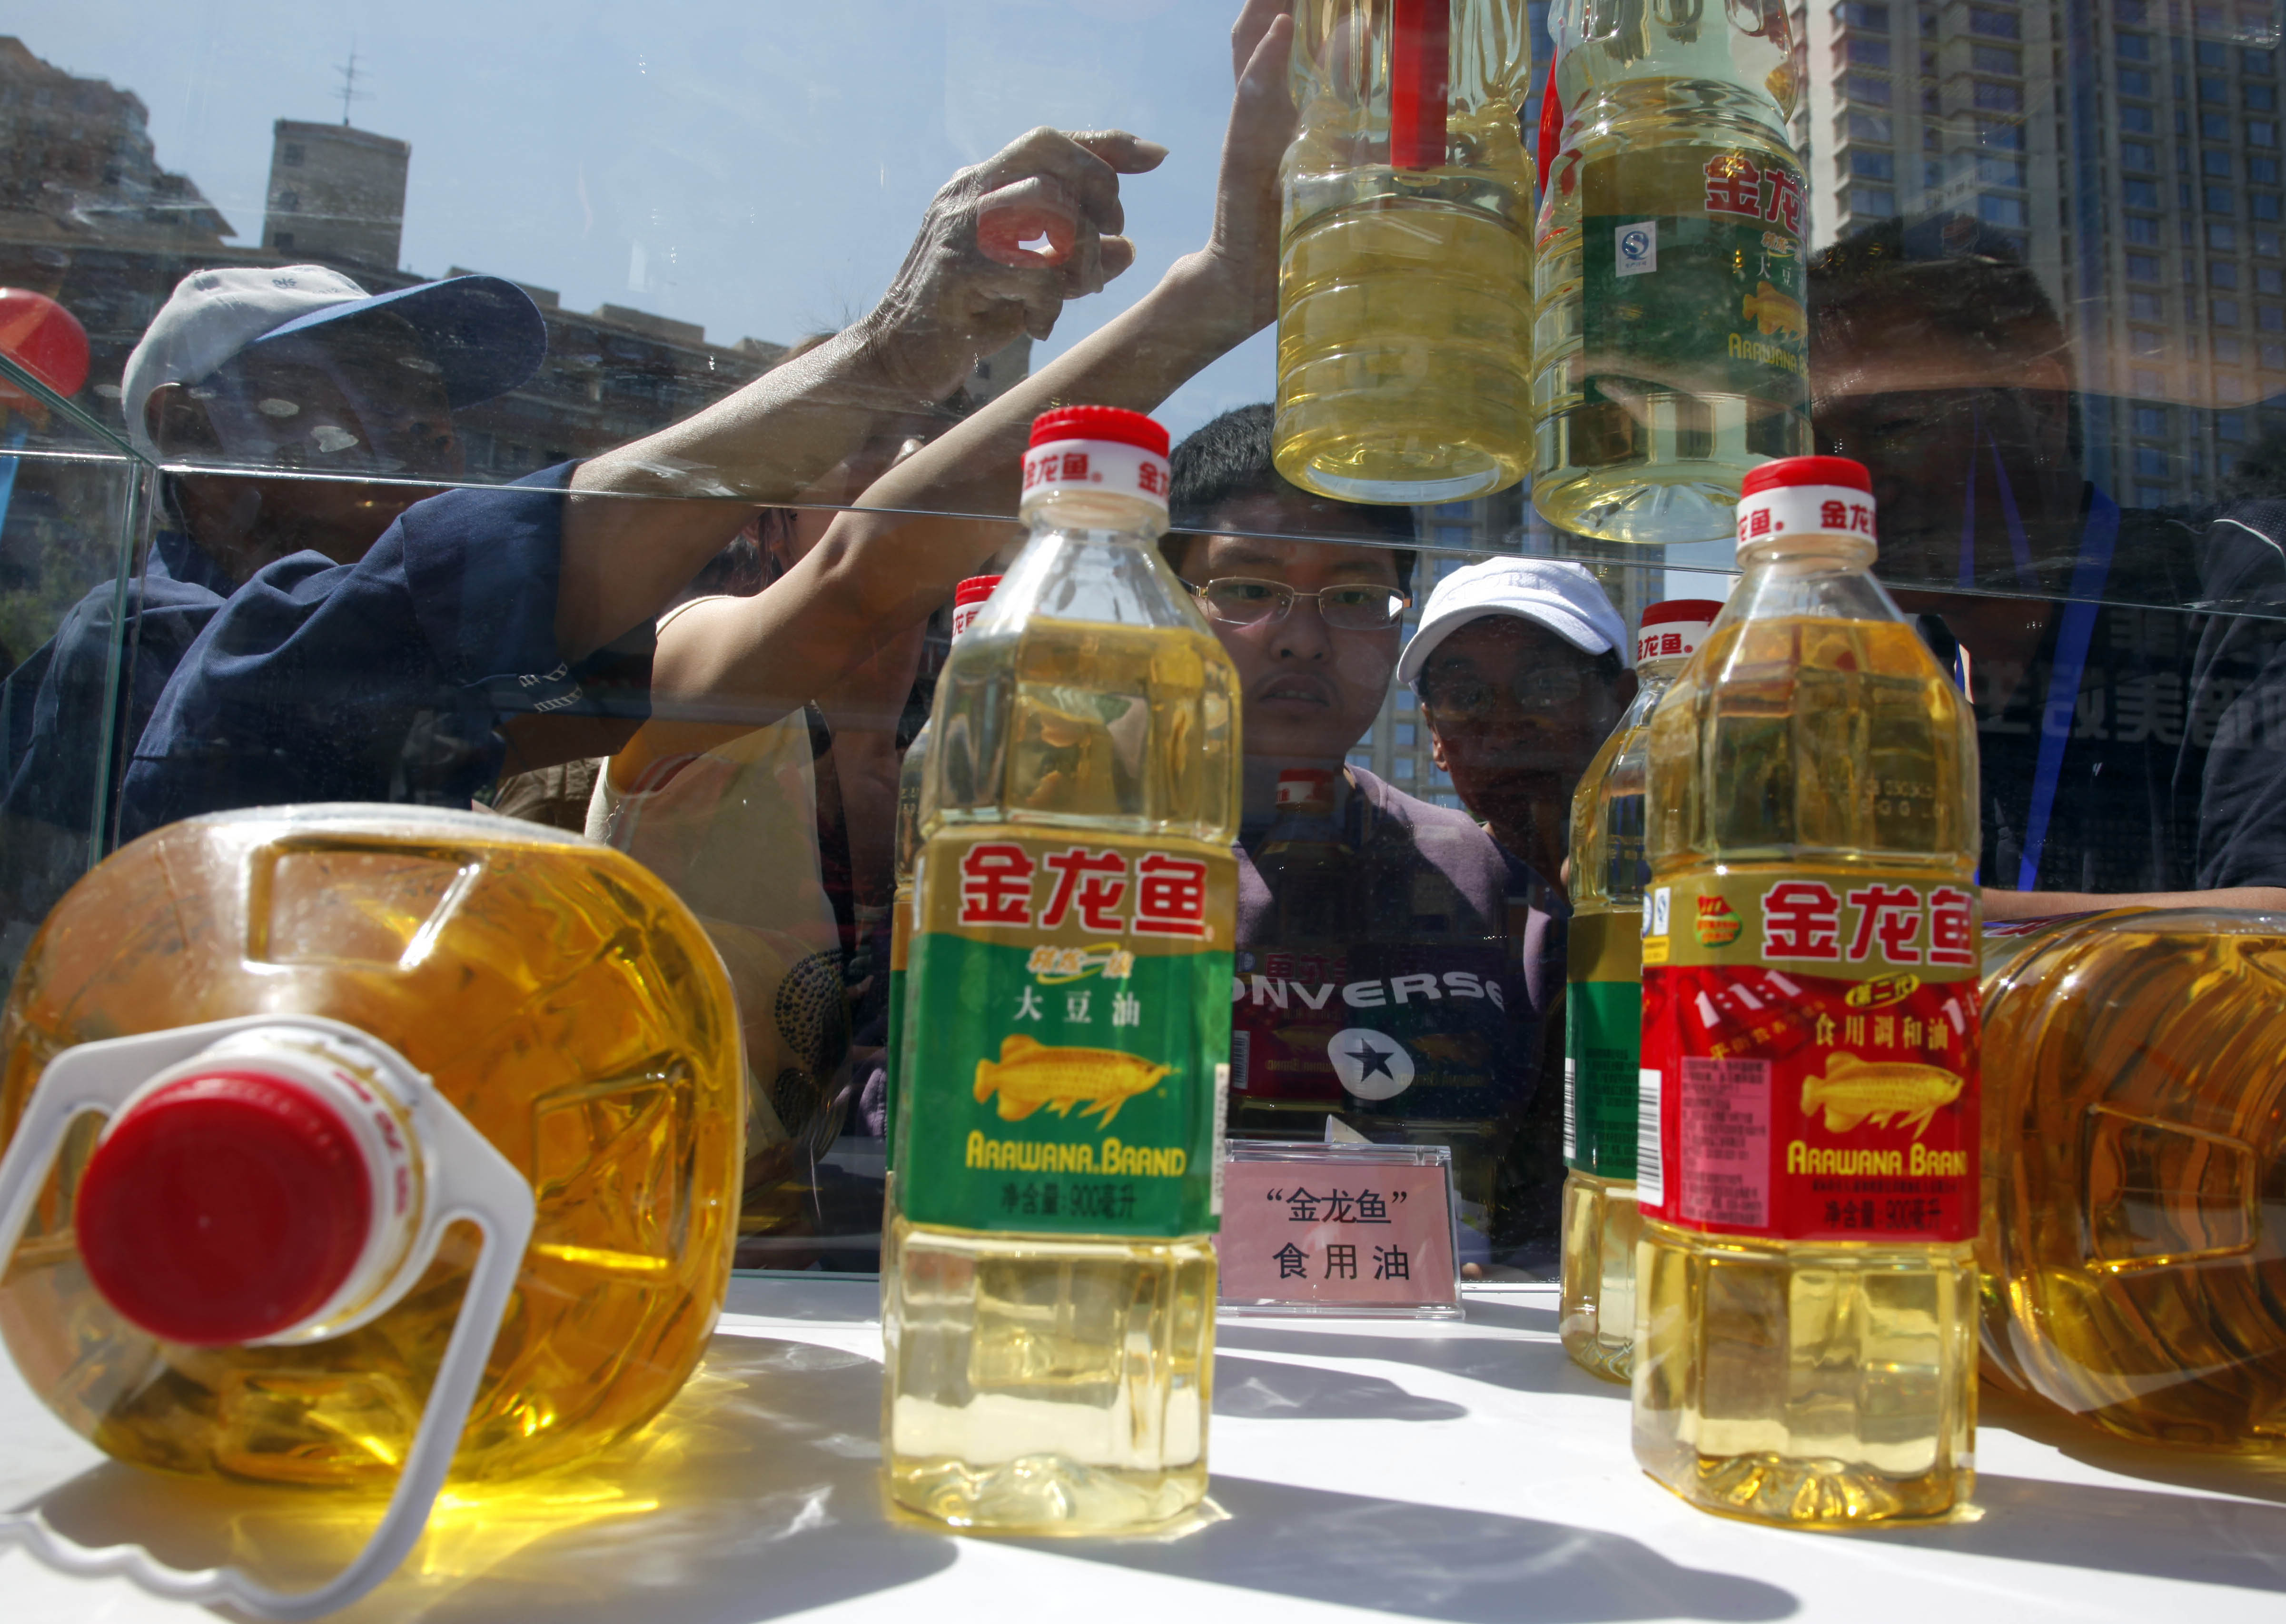 Beijing residents try to tell counterfeit cooking oil products from the real thing during an event to promote awareness of economic crimes. Photo: AP 